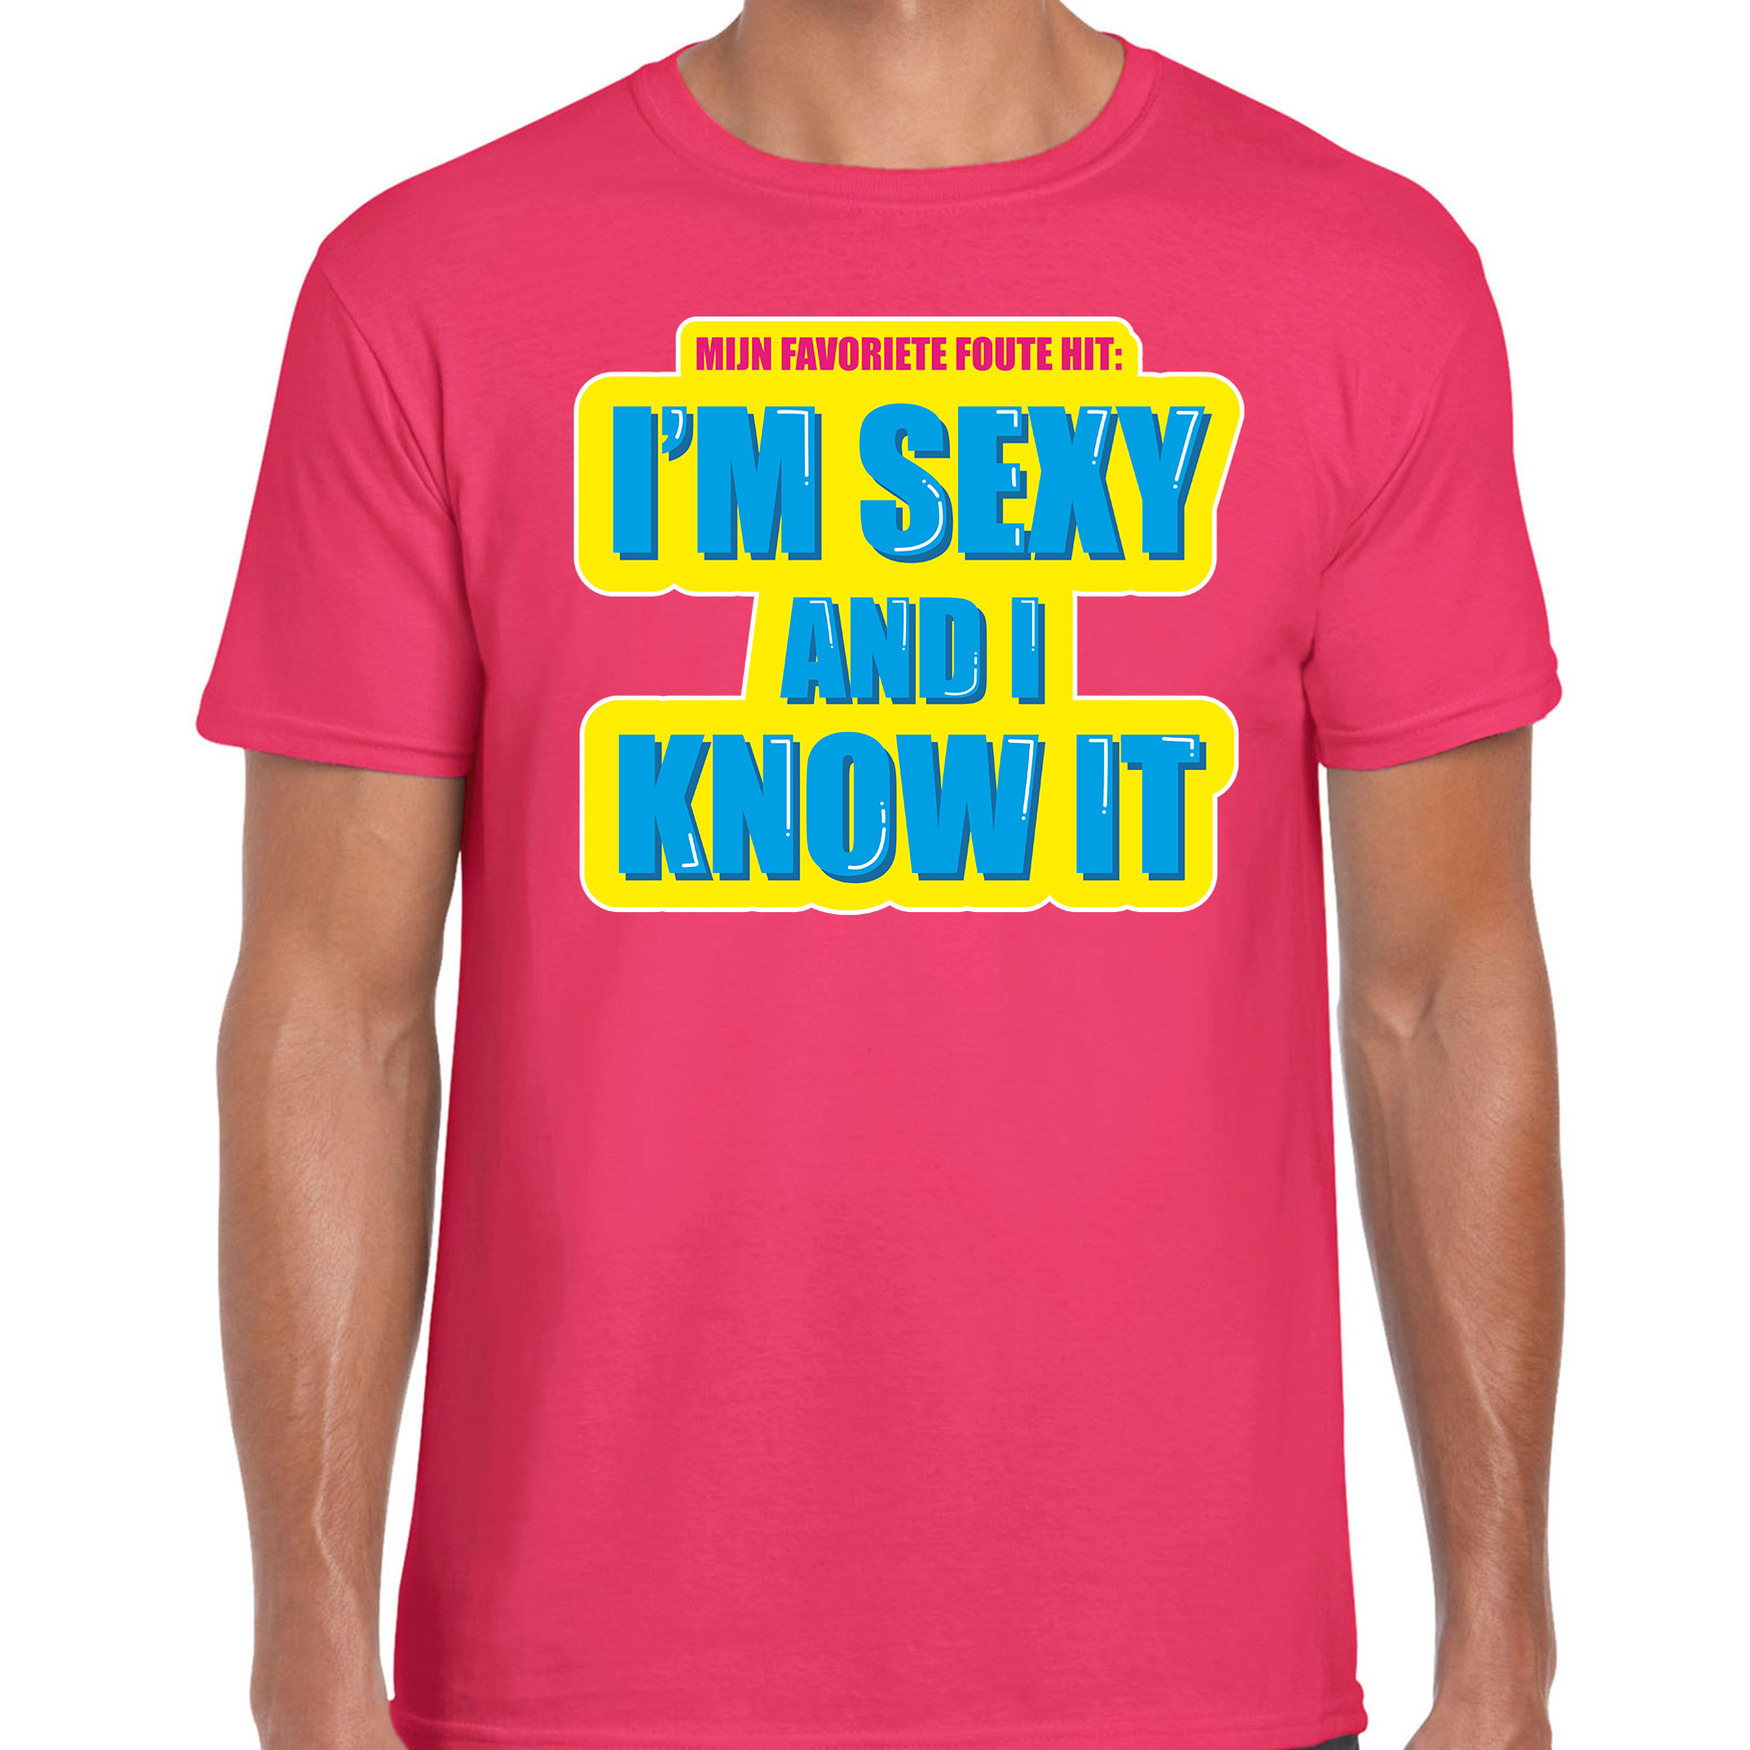 Foute party I m sexy and i know it verkleed t-shirt roze heren Foute party hits outfit- kleding